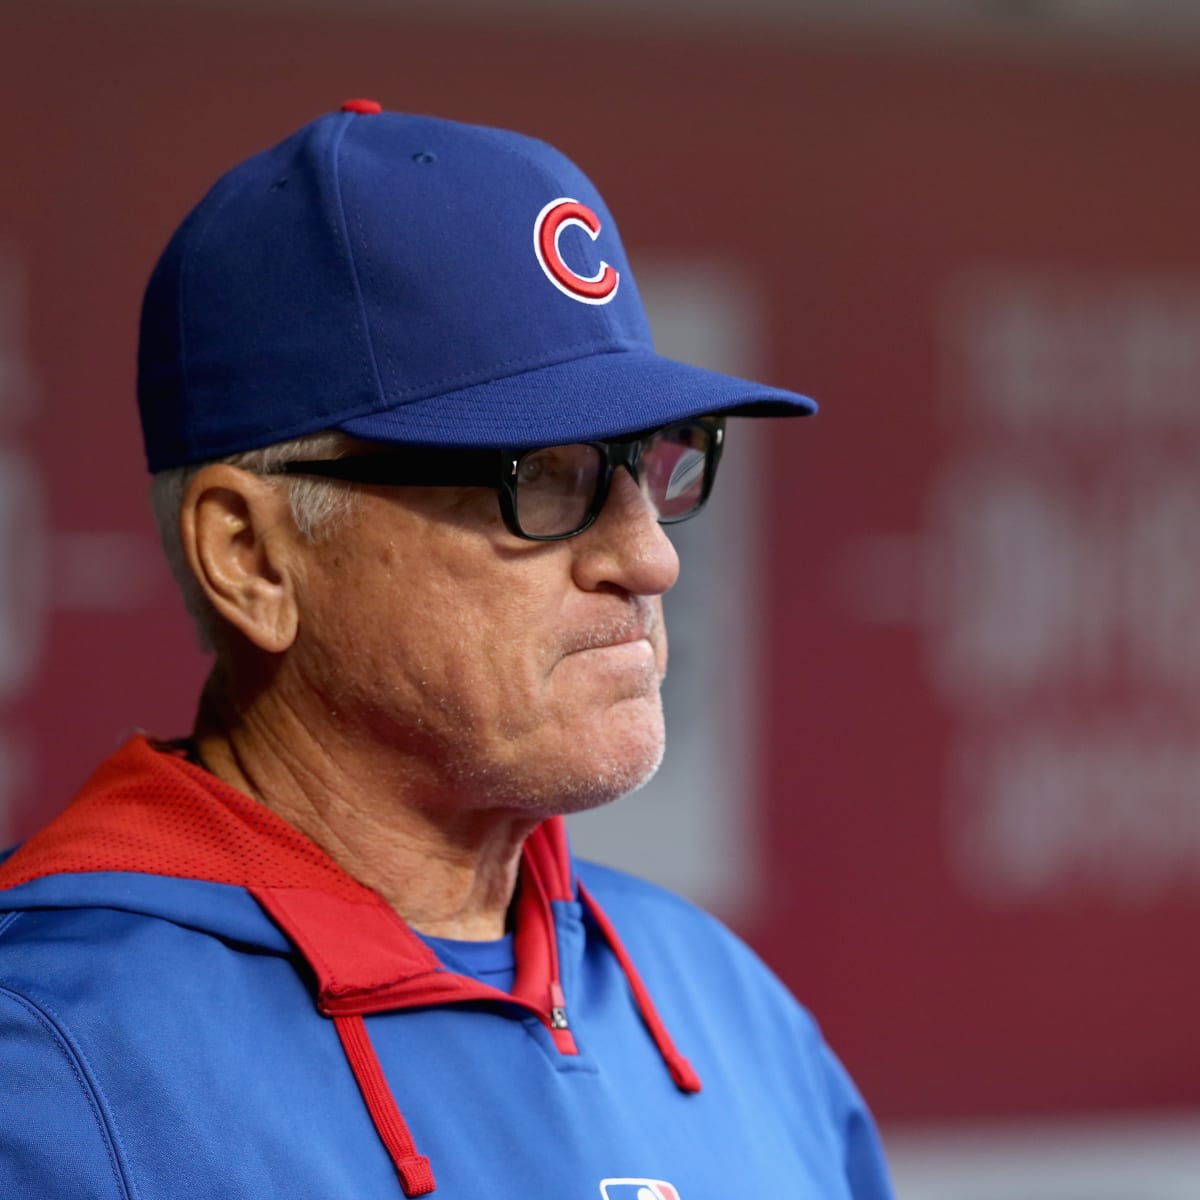 Angels hire Joe Maddon as manager after his Cubs departure - Sports  Illustrated